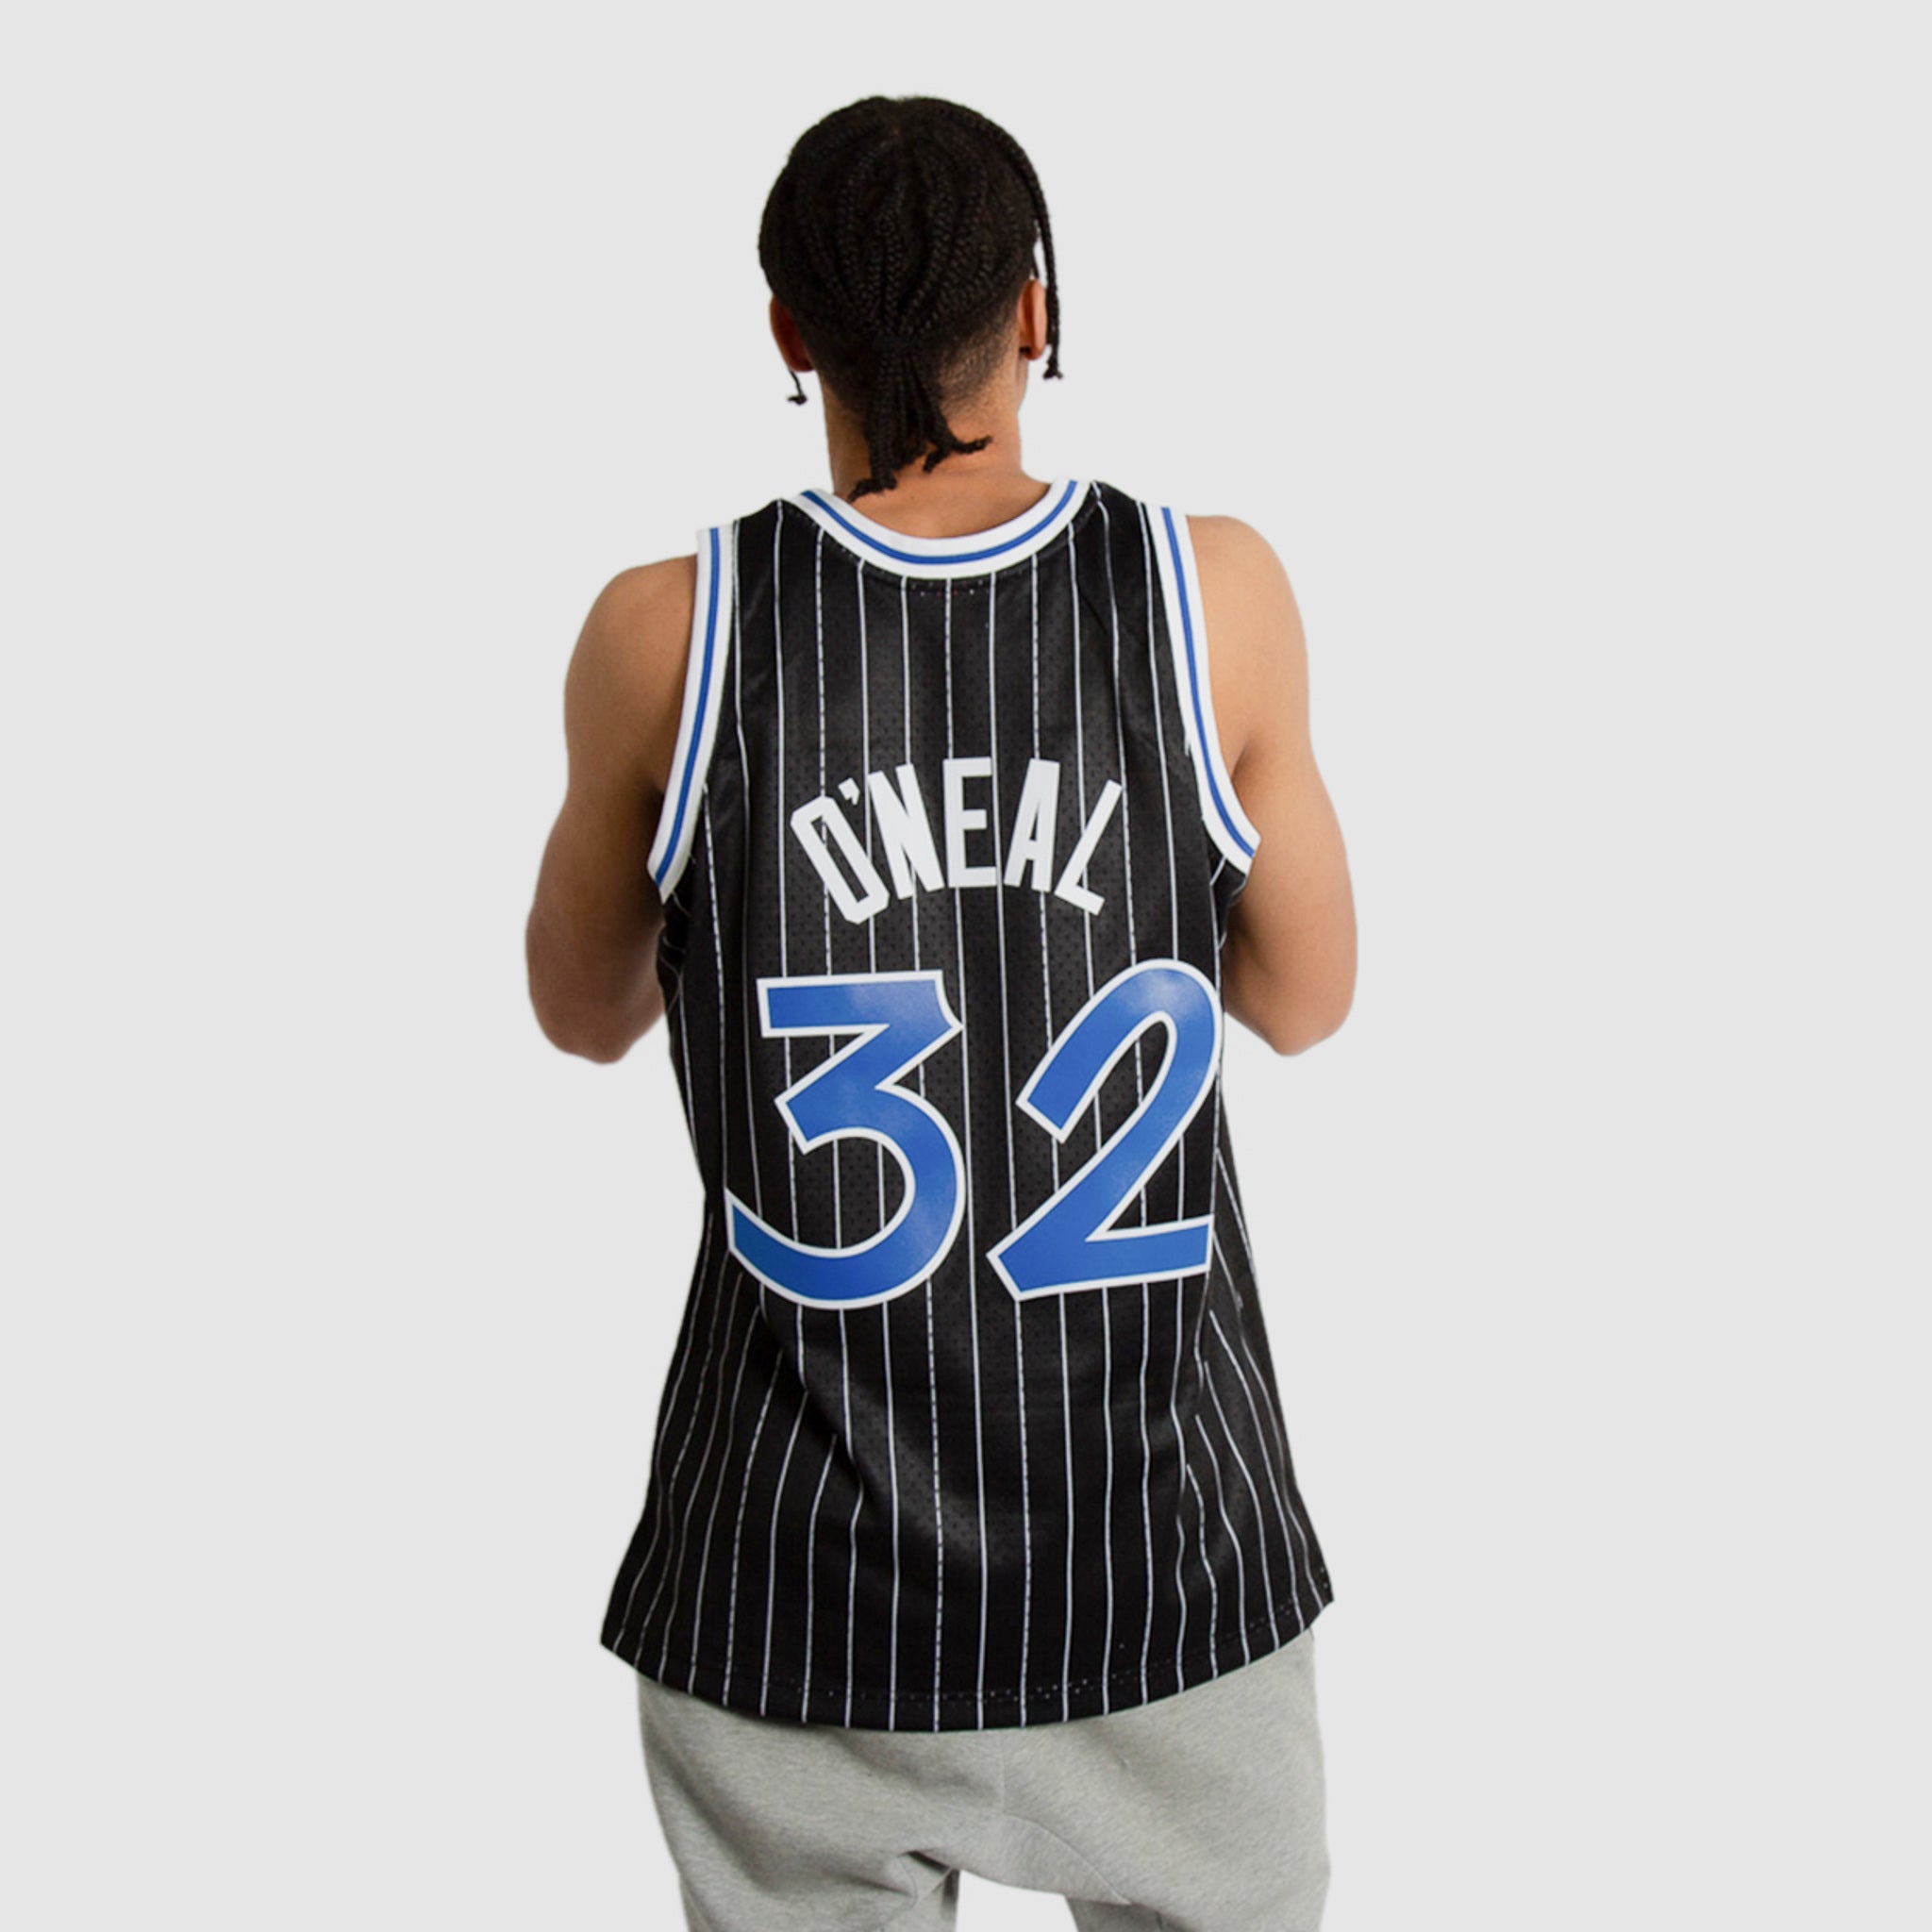 Shaq Shaquille O'neal Orlando Magic Jersey NBA Hardwood Classic Adult Size  S +2 for Sale in Glendale, CA - OfferUp